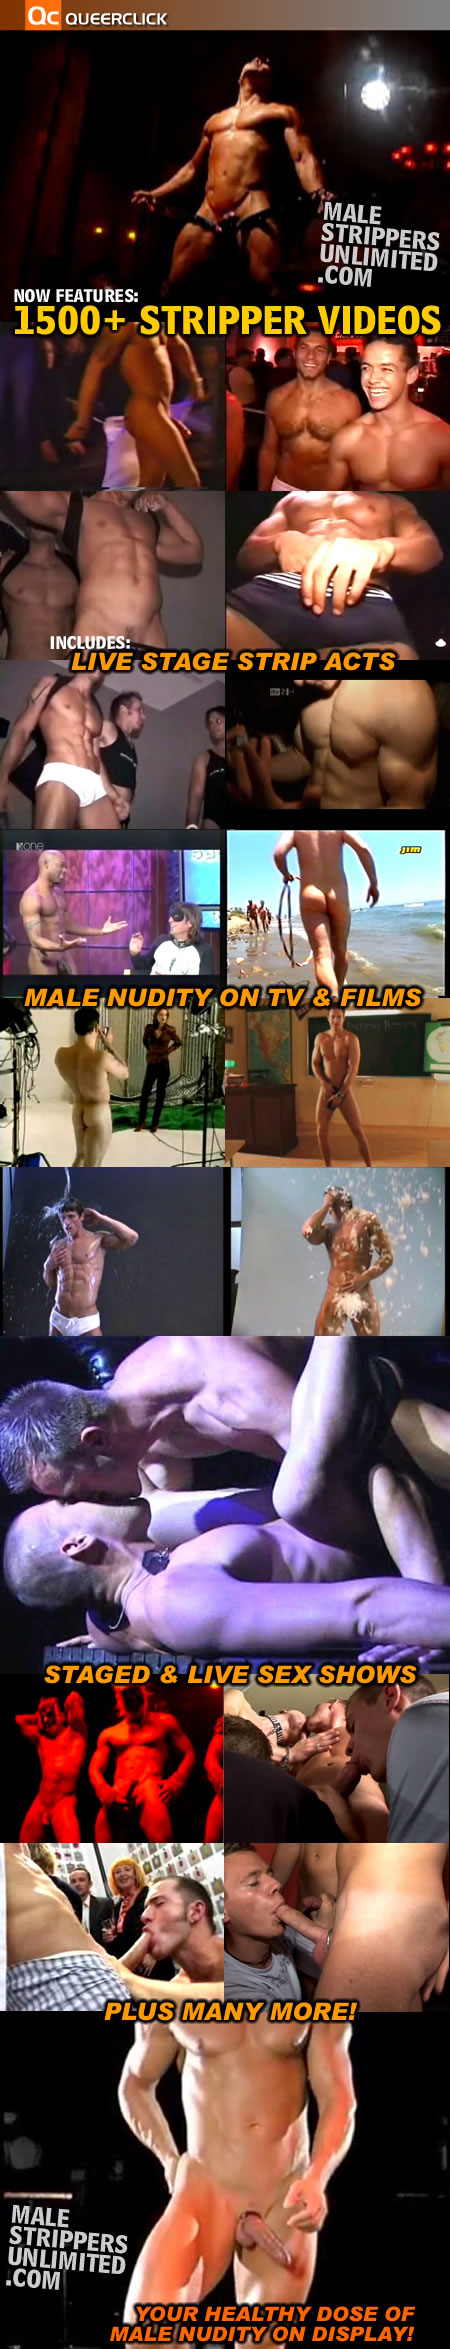 1500+ Video Clips of Hot Male Stripper Action!